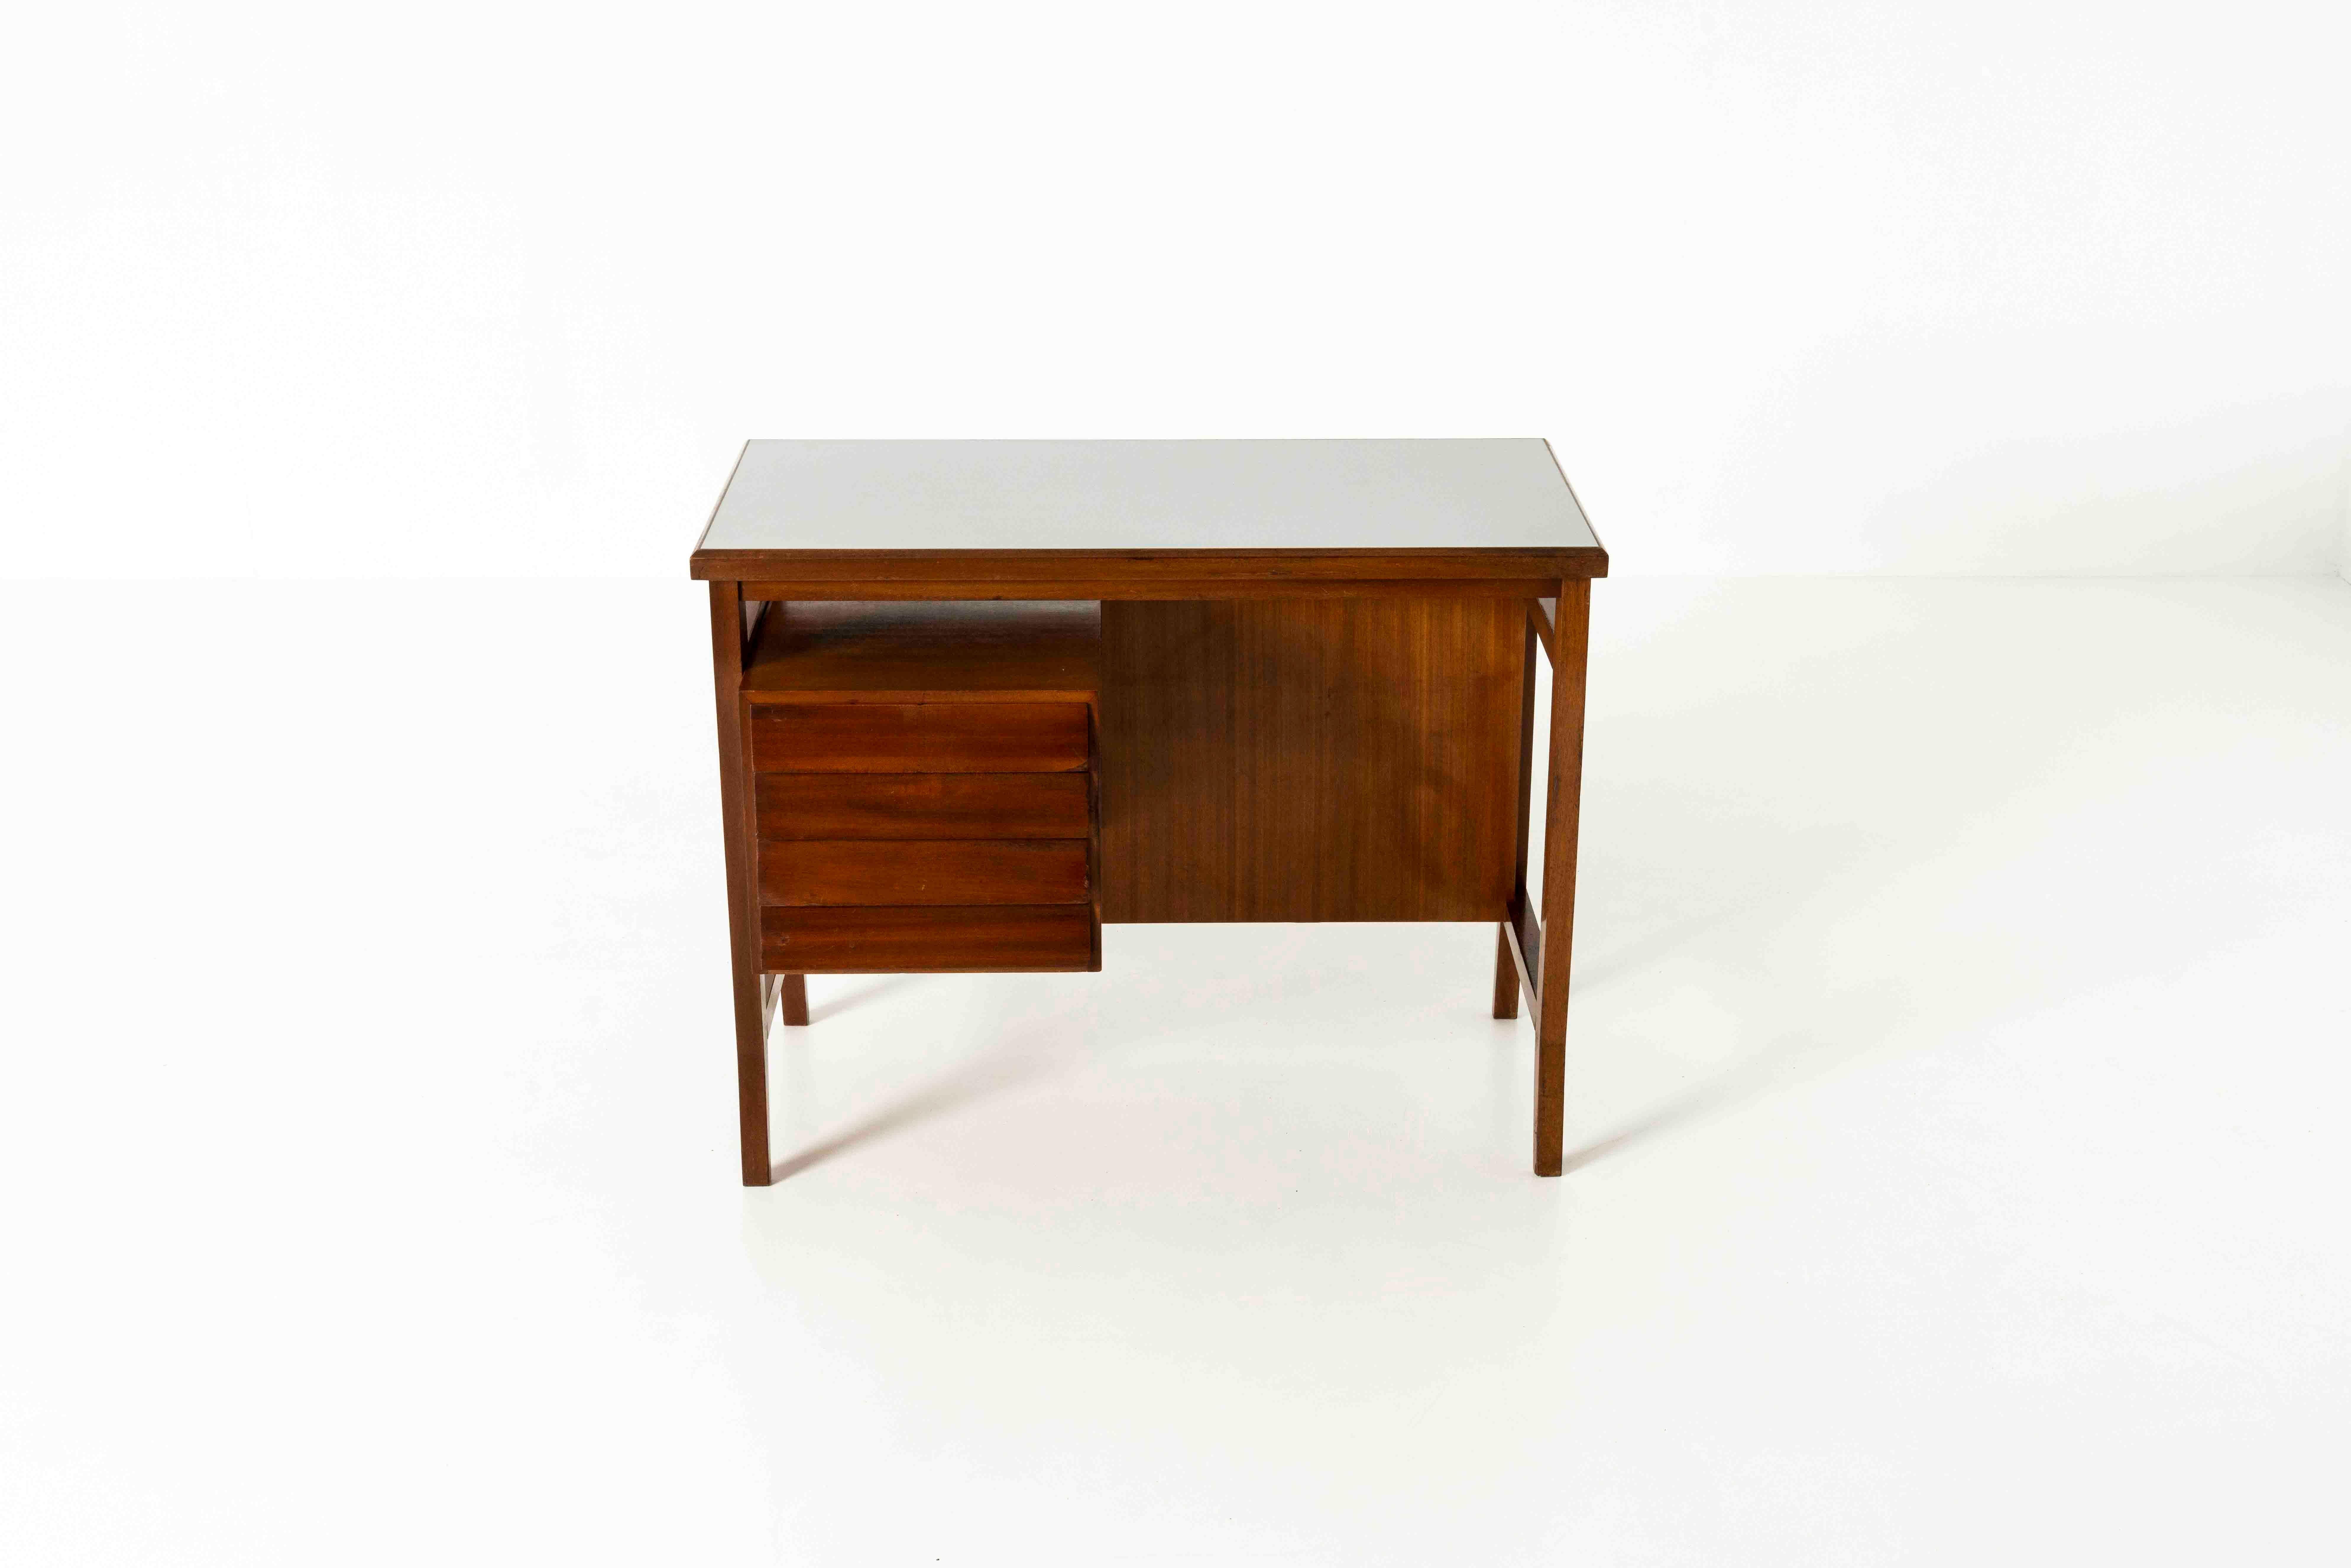 Small writers desk by Italian Mid-Century Modern designer Gio Ponti. This desk is manufactured for Schirolli in the 1960s and has the brand of the manufacturer available. This cute desk in wood is particularly suitable for a smaller space or a